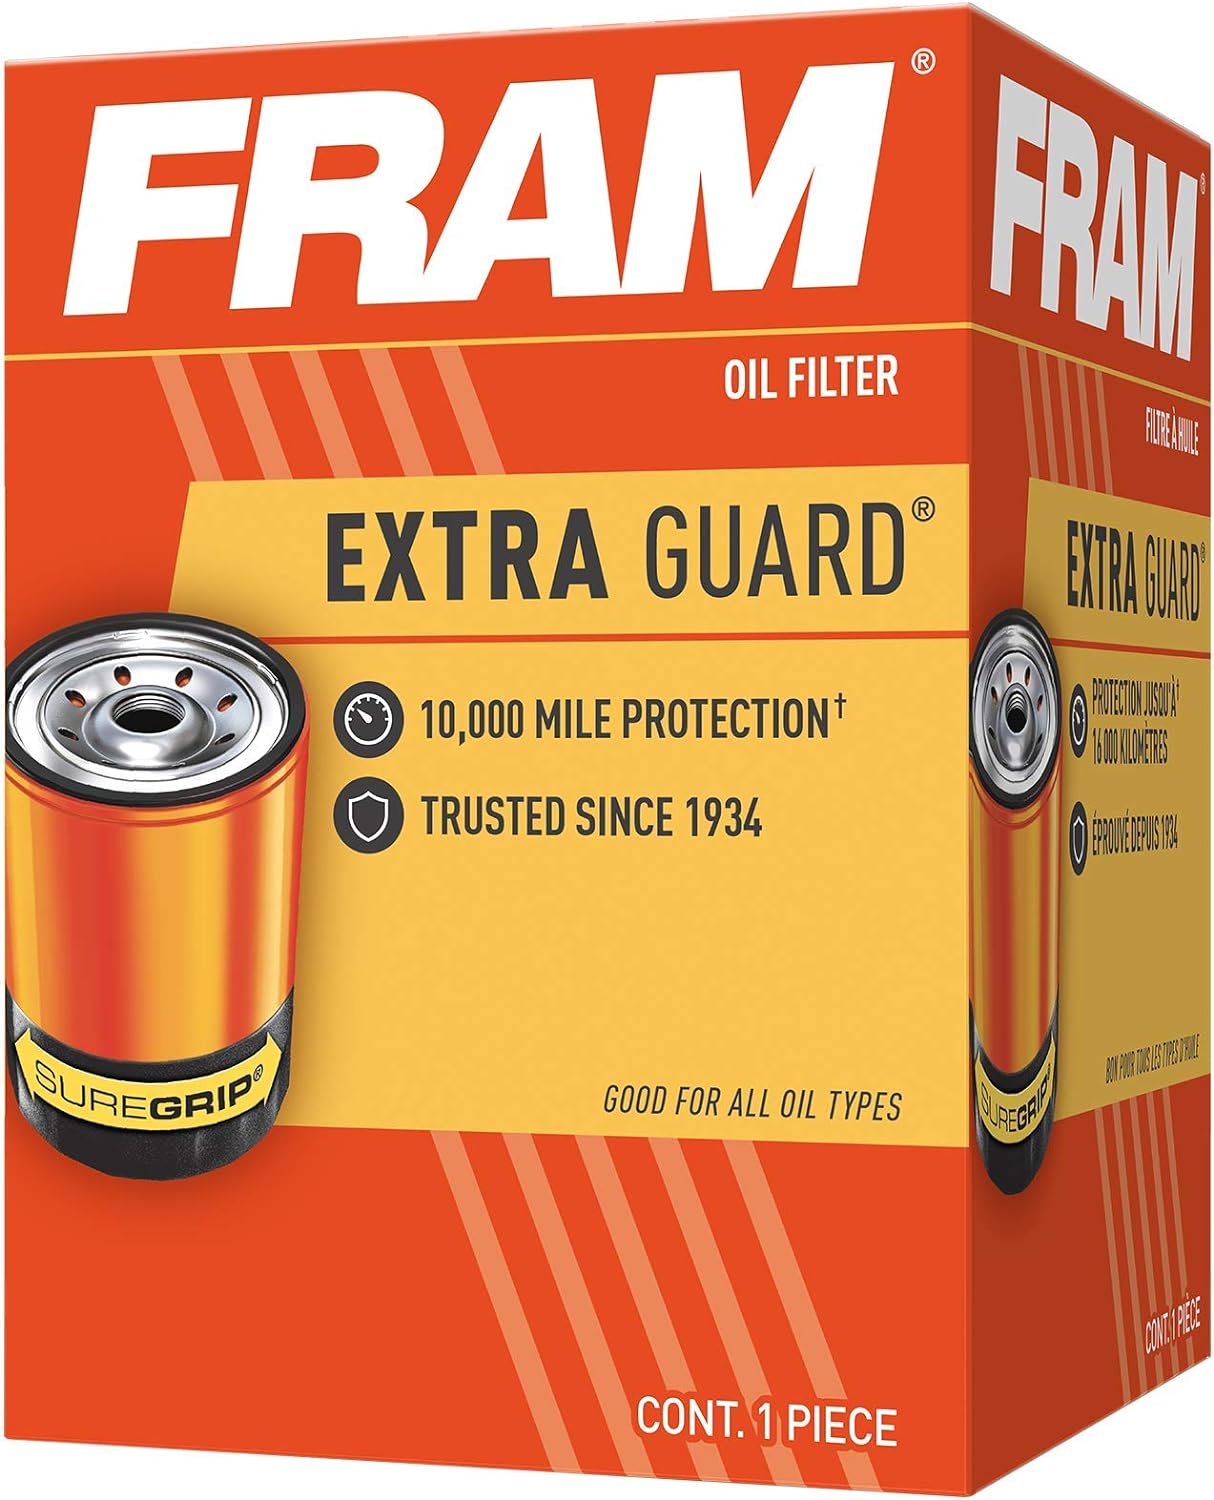 Fram Extra Guard Oil Filter Packaging box isolated on a white background.